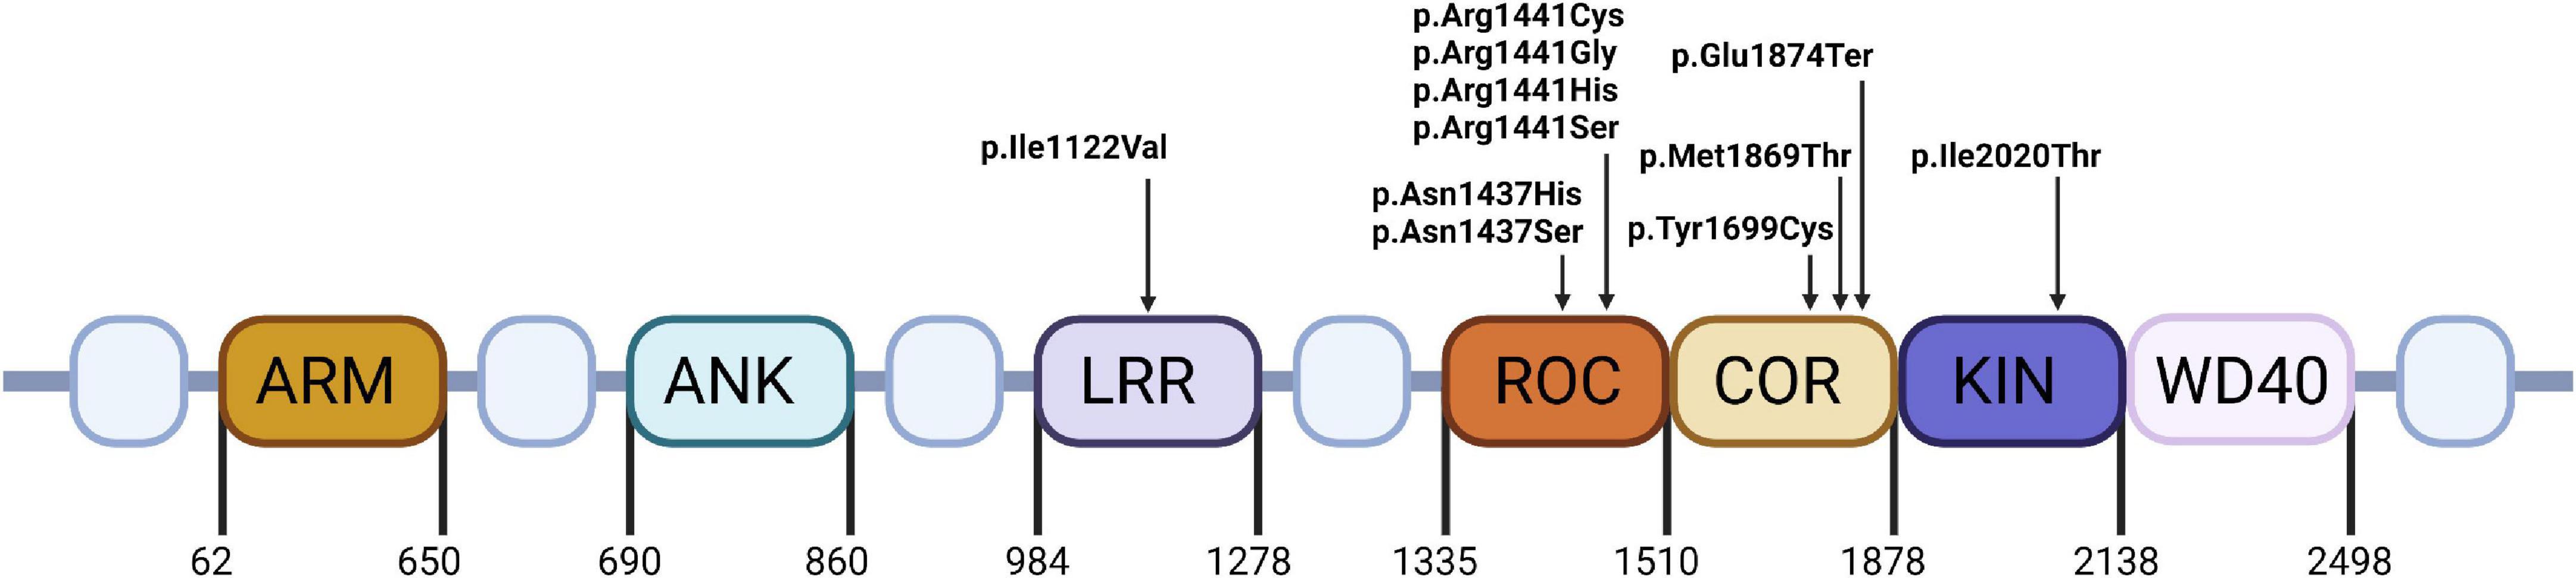 Frontiers | Review of the epidemiology and variability of LRRK2 